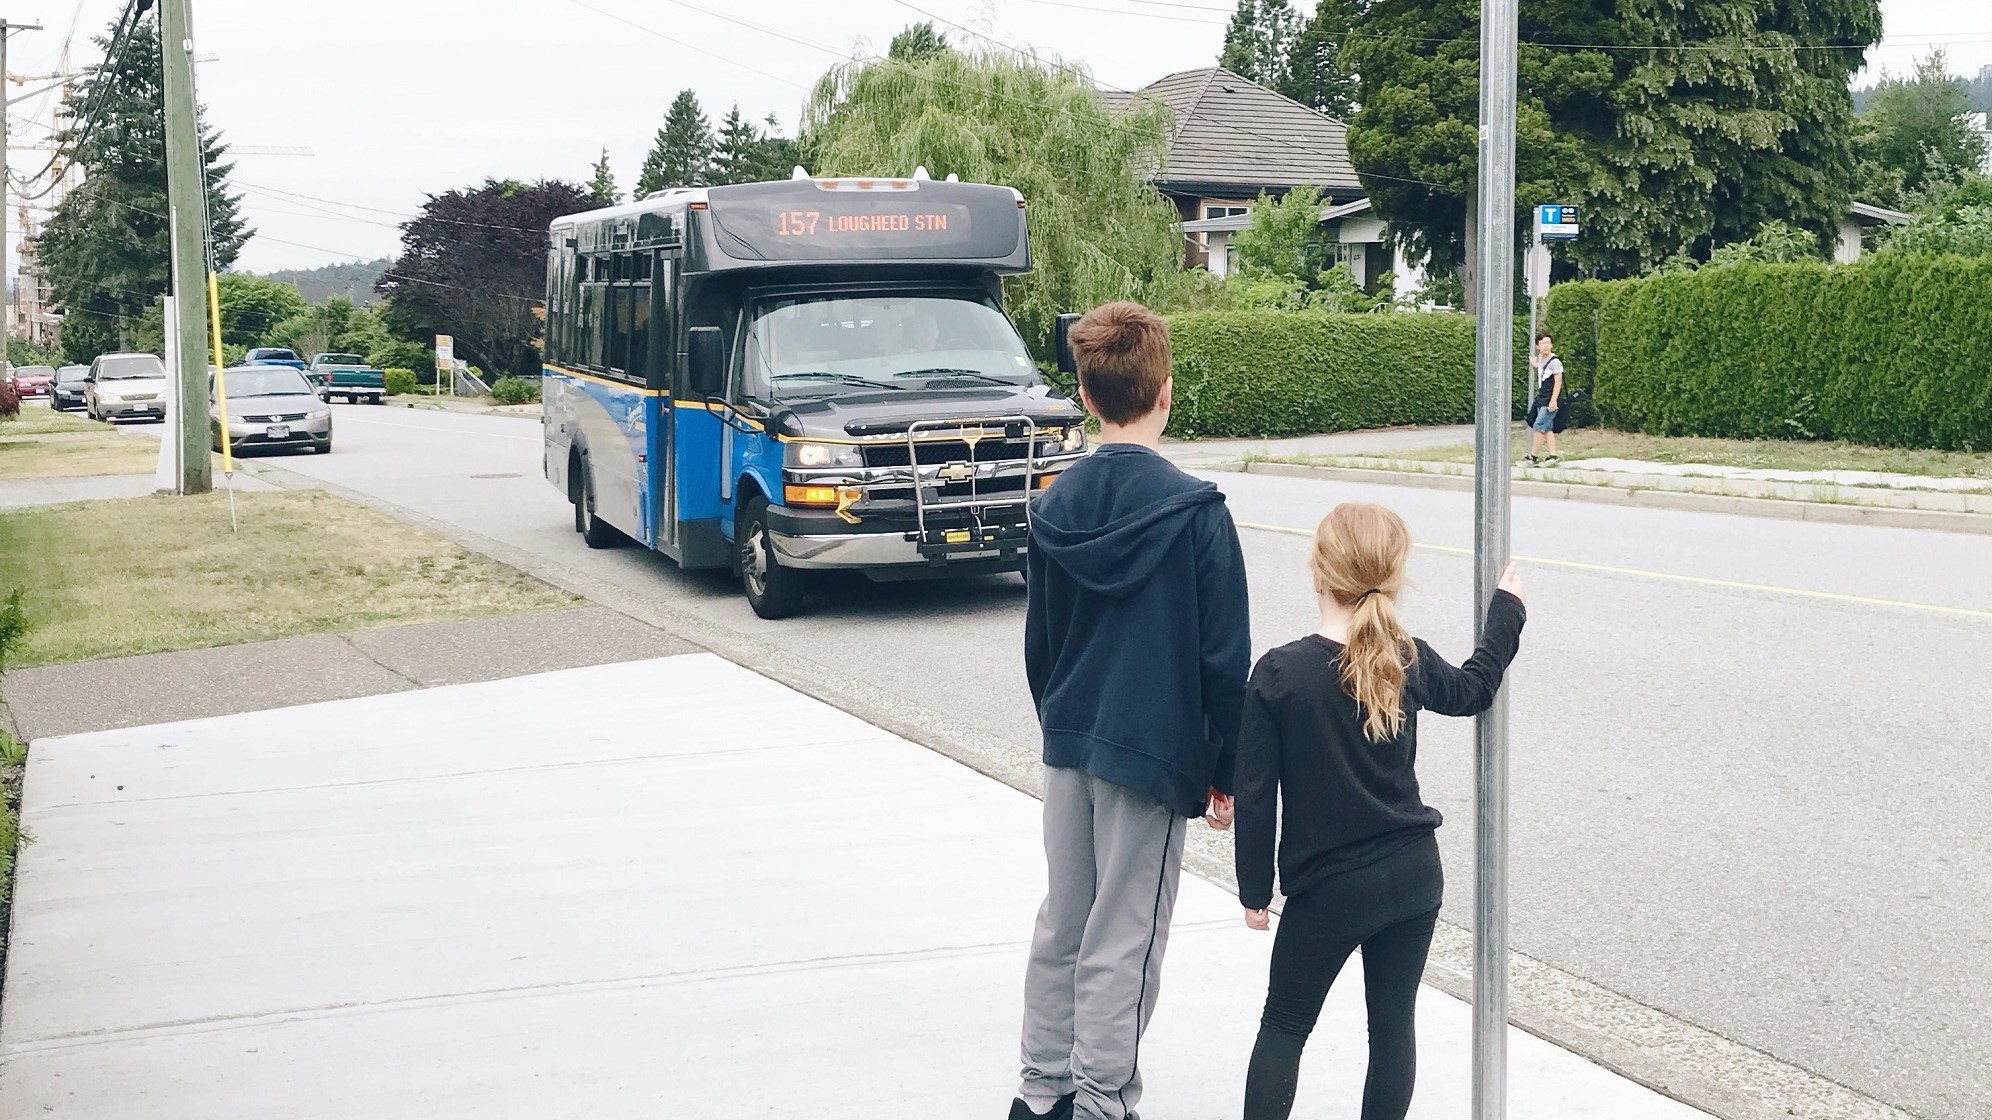 A pair of kids wait for the 157 Lougheed Station bus